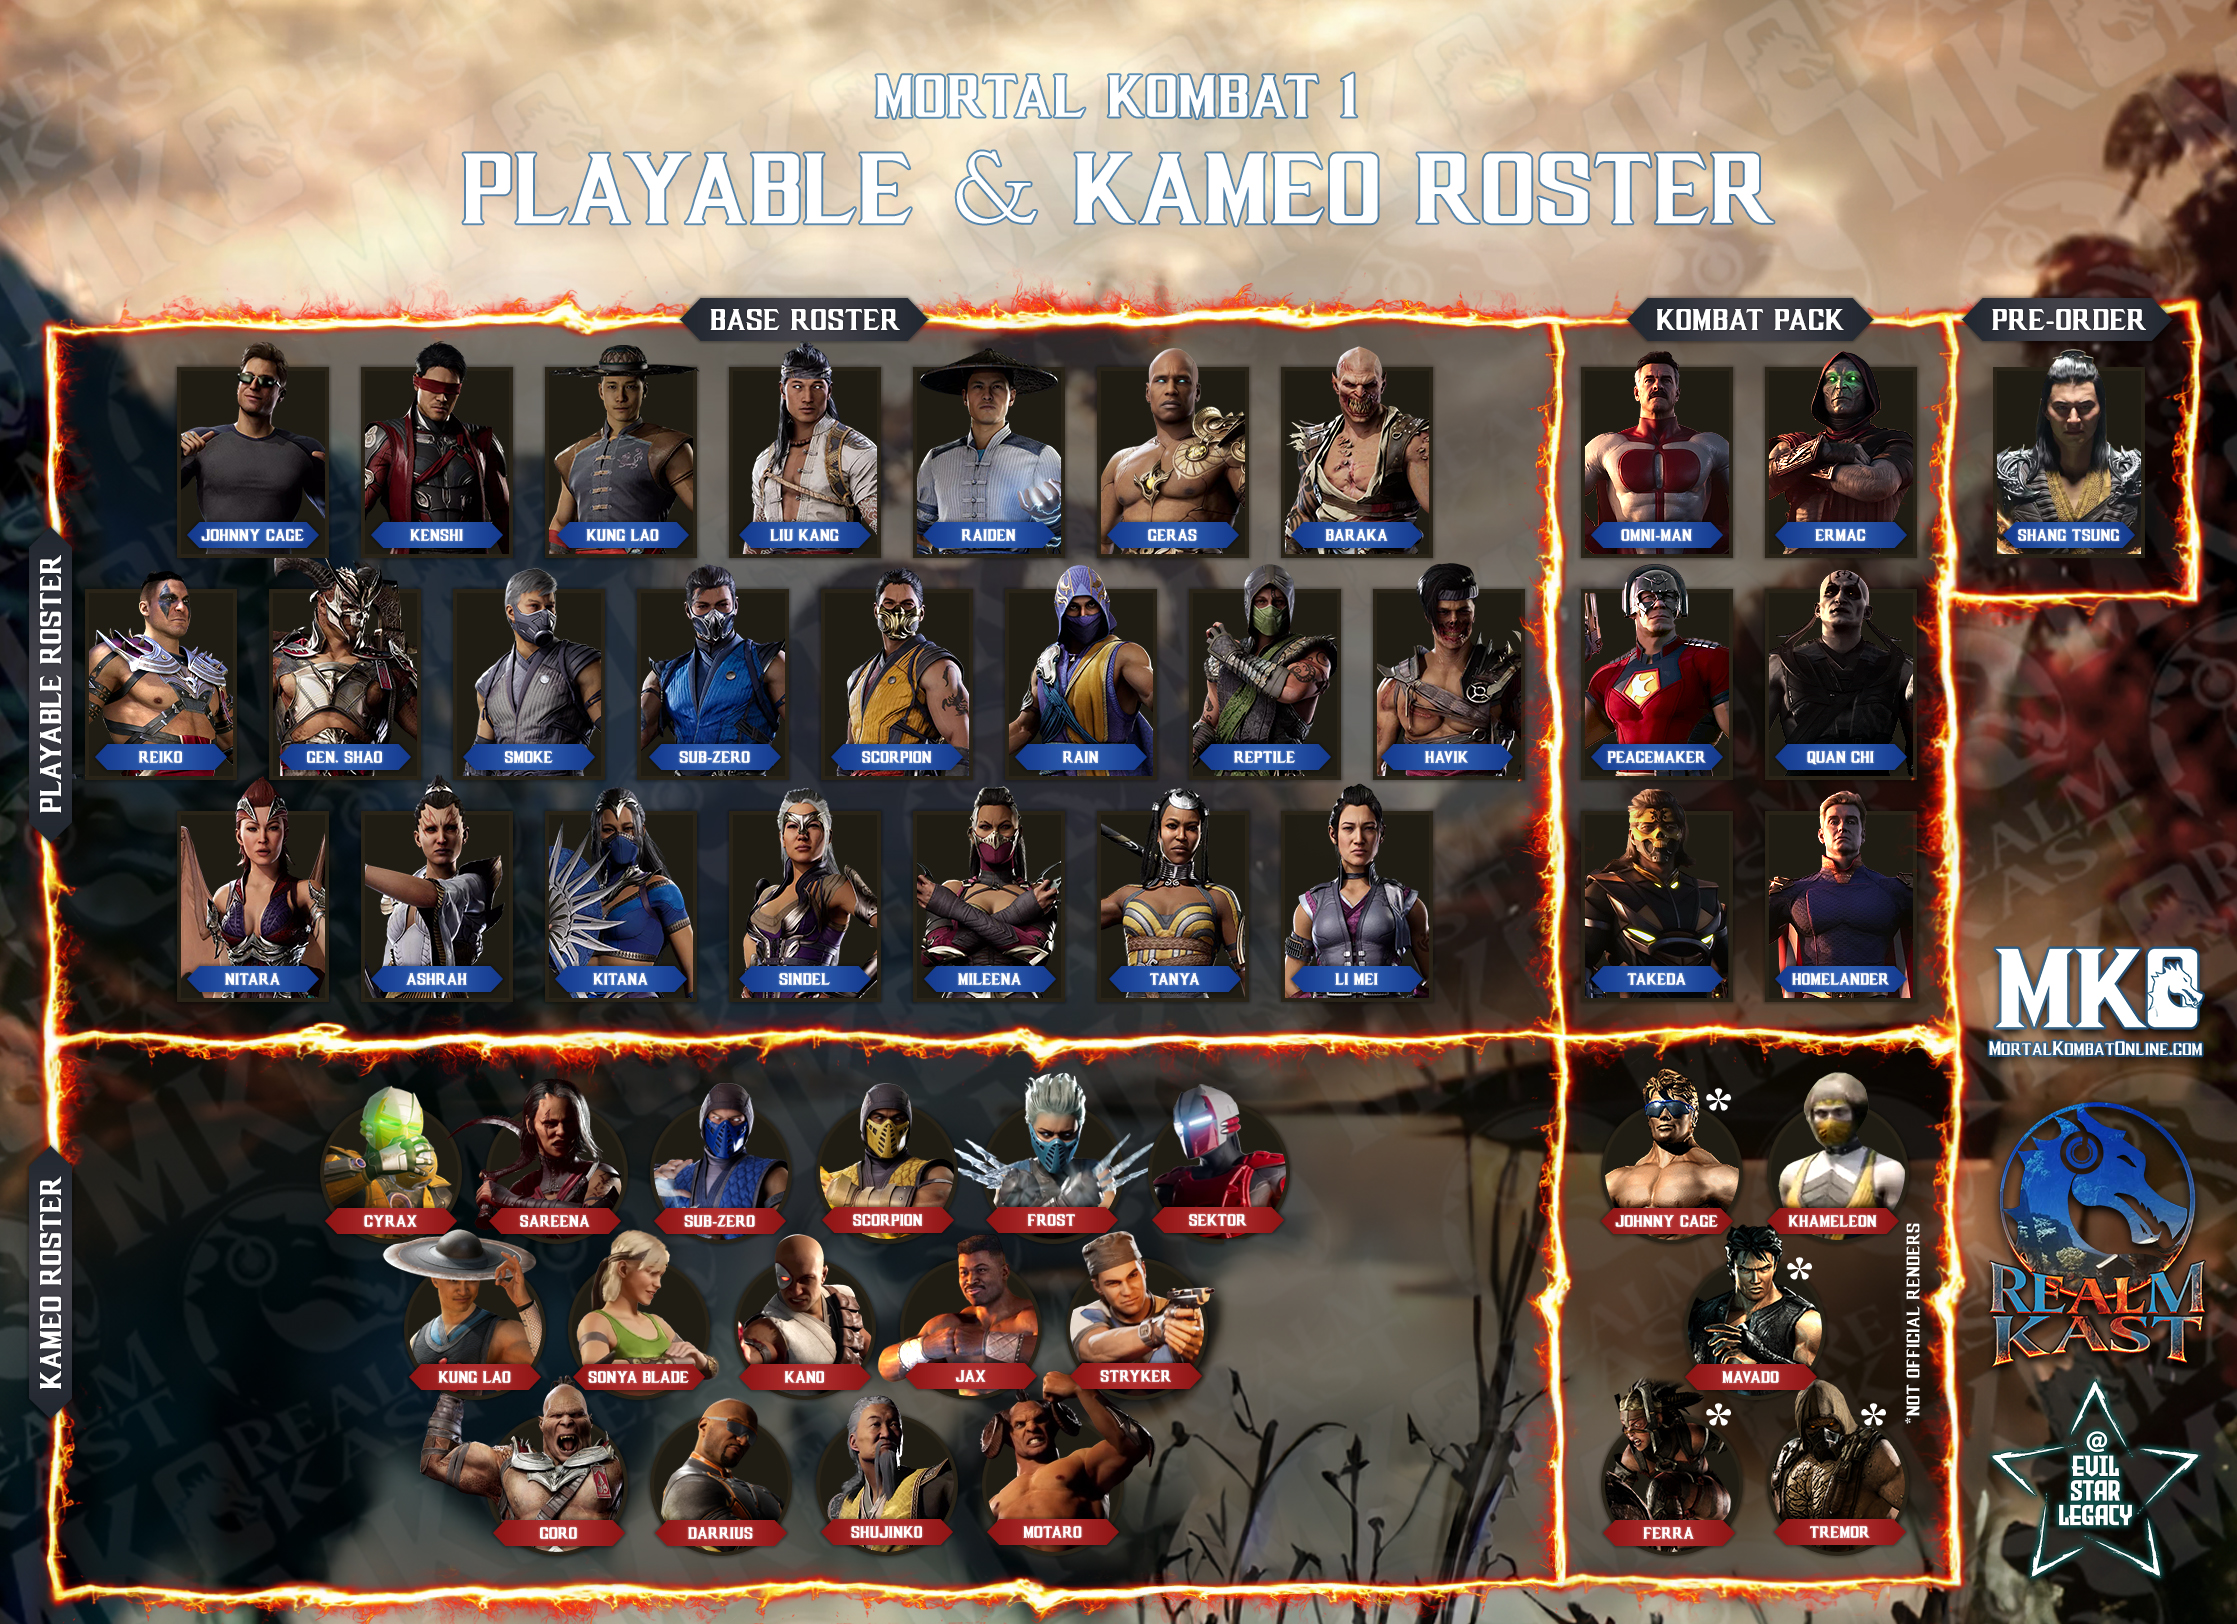 Here is our "final" roster image, with all confirmed characters as of Mortal Kombat 1's release! It looks like Reiko takes the last spot for the launch of the game with 23 playable characters and 15 Kameo Fighters confirmed! Thank you @EvilStarLegacy for making this image on our behalf! #MortalKombat #MortalKombat1 #MK1 #ShangTsung #Reiko